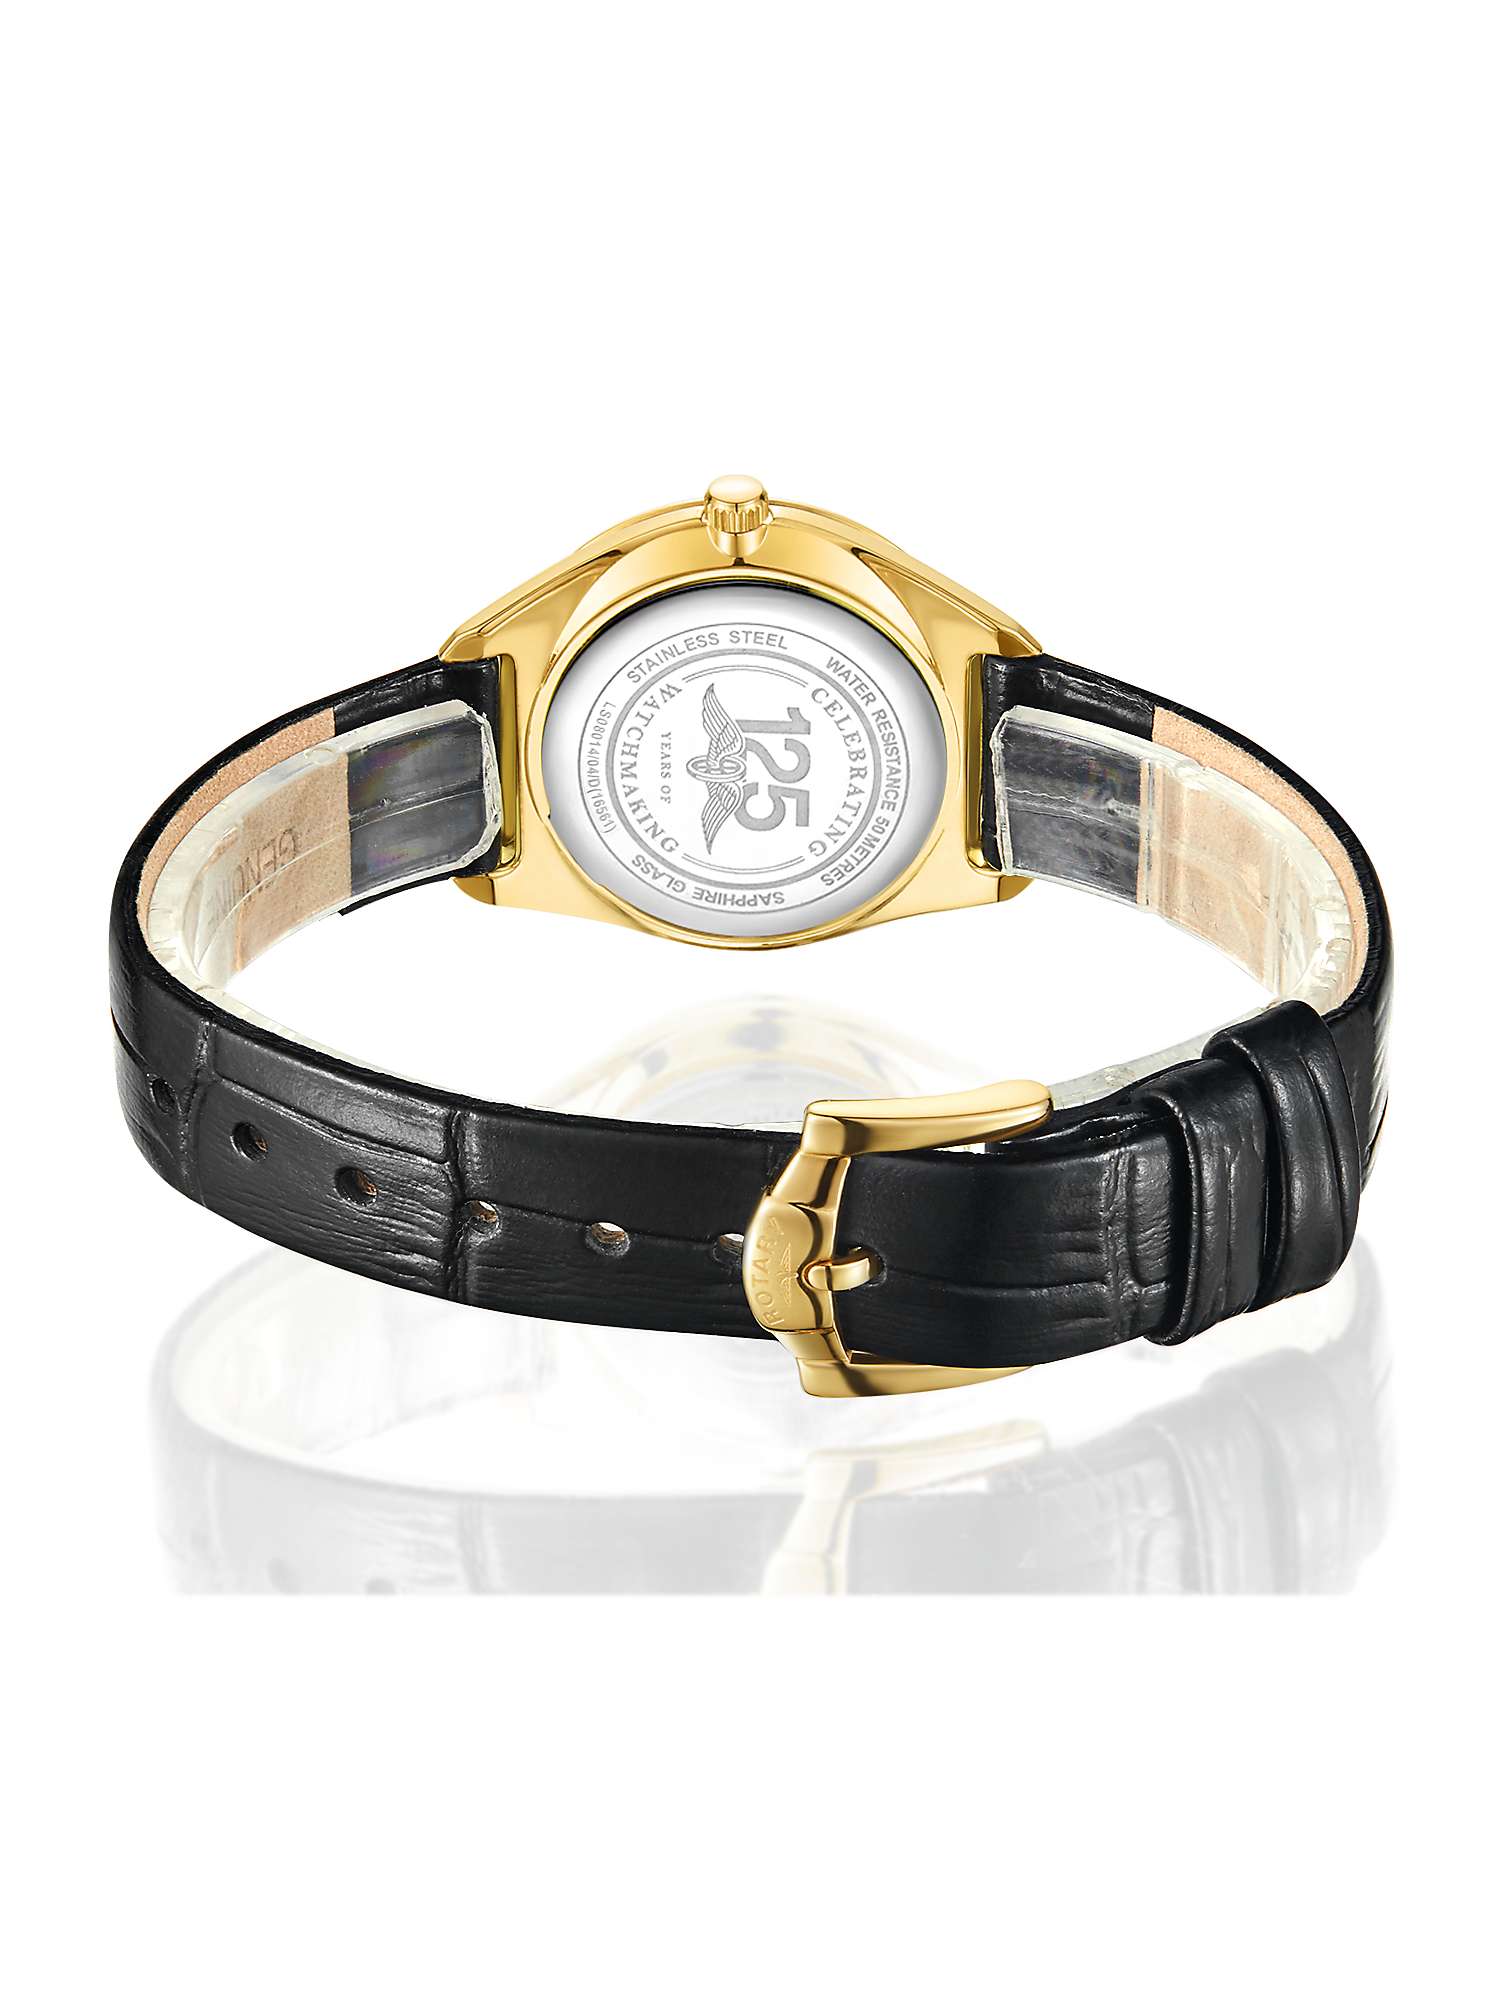 Buy Rotary Women's Ultra Slim Leather Strap Watch Online at johnlewis.com